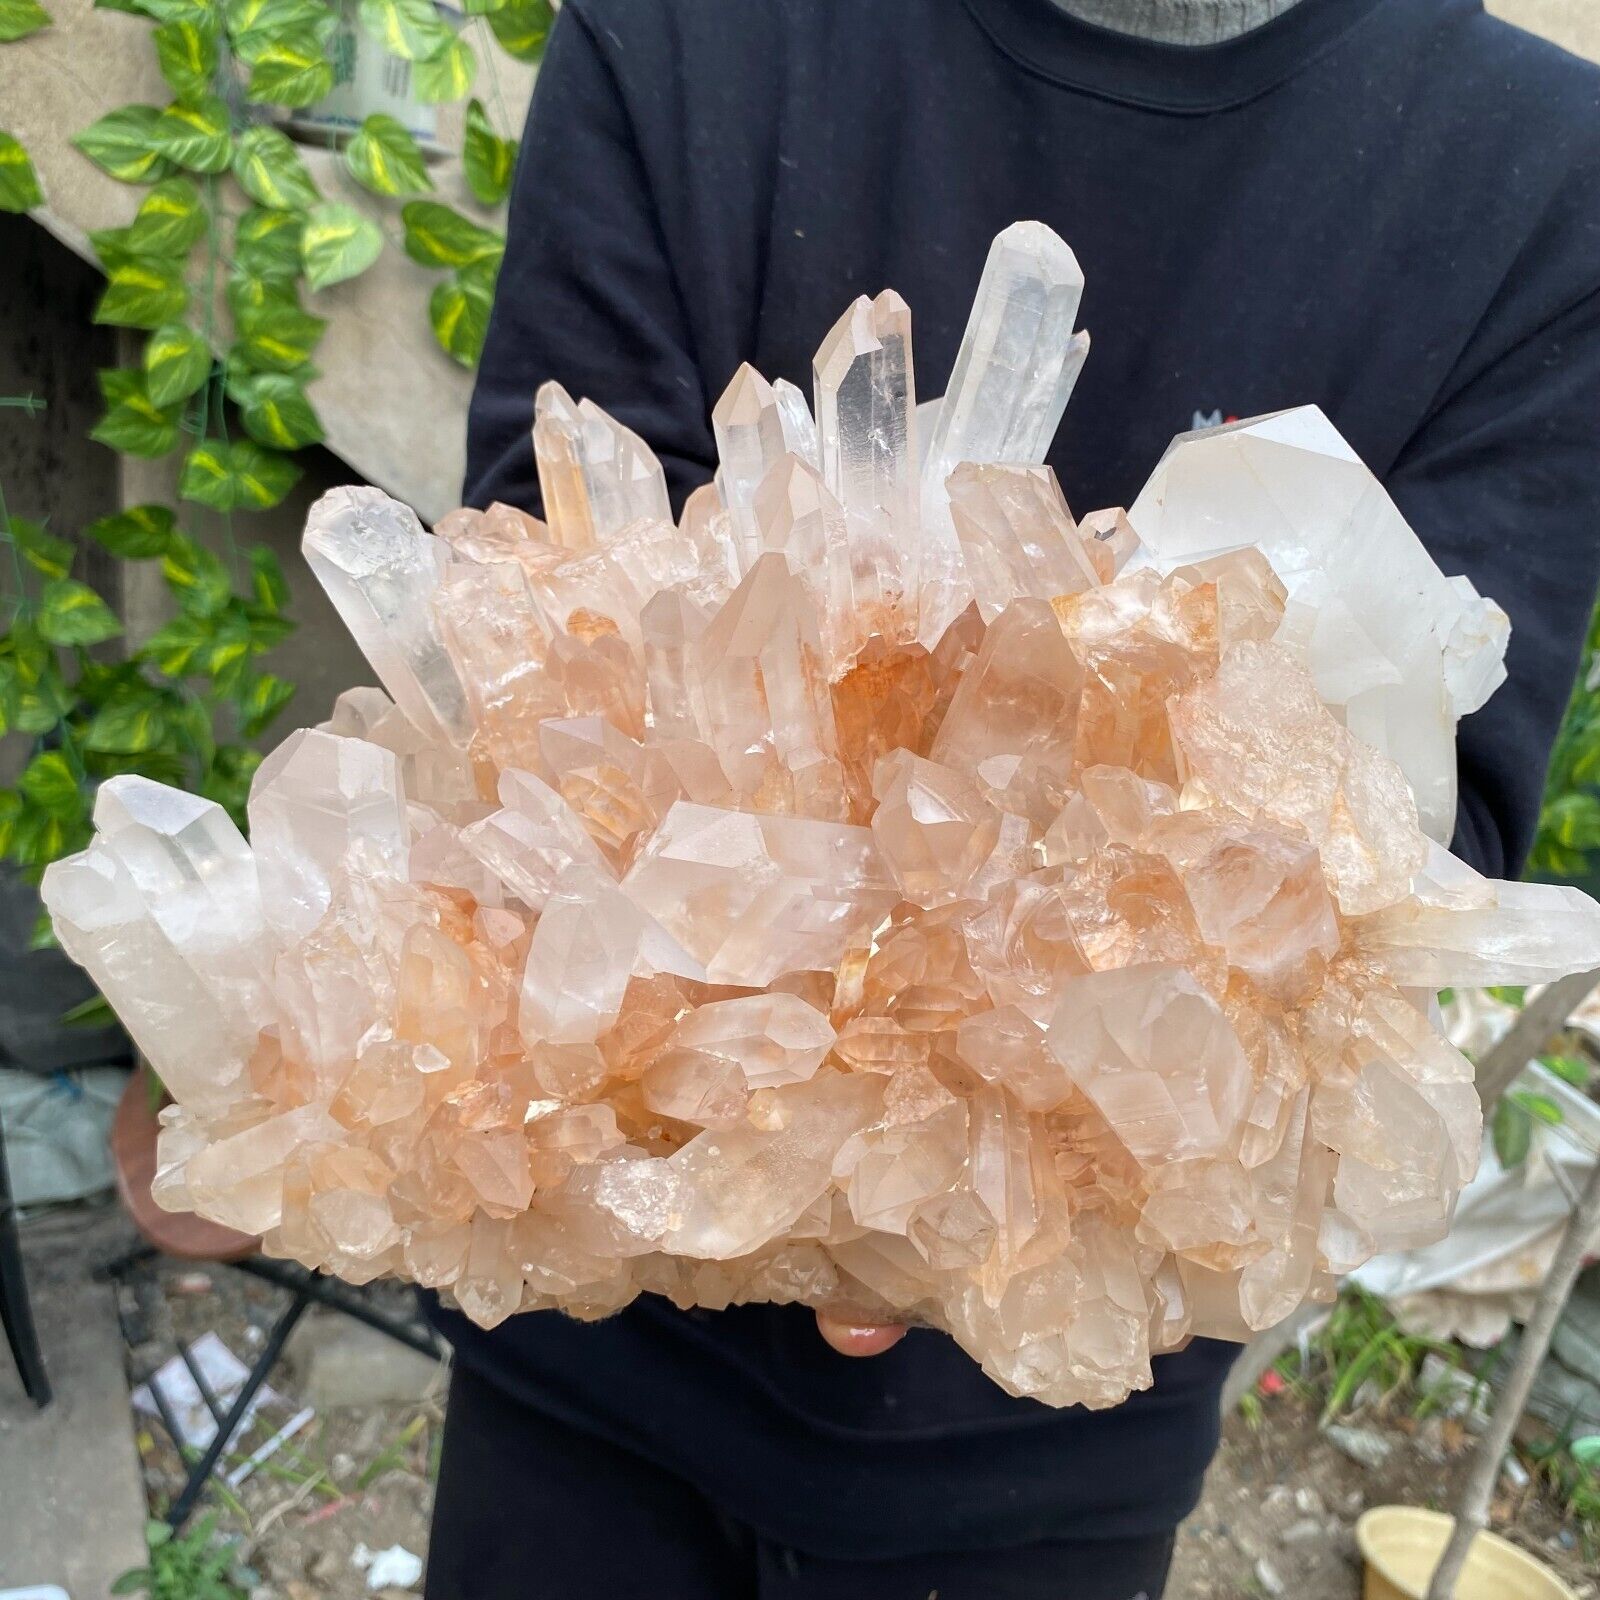 20lb A+++Large Natural clear white Crystal Himalayan quartz cluster /mineralsls